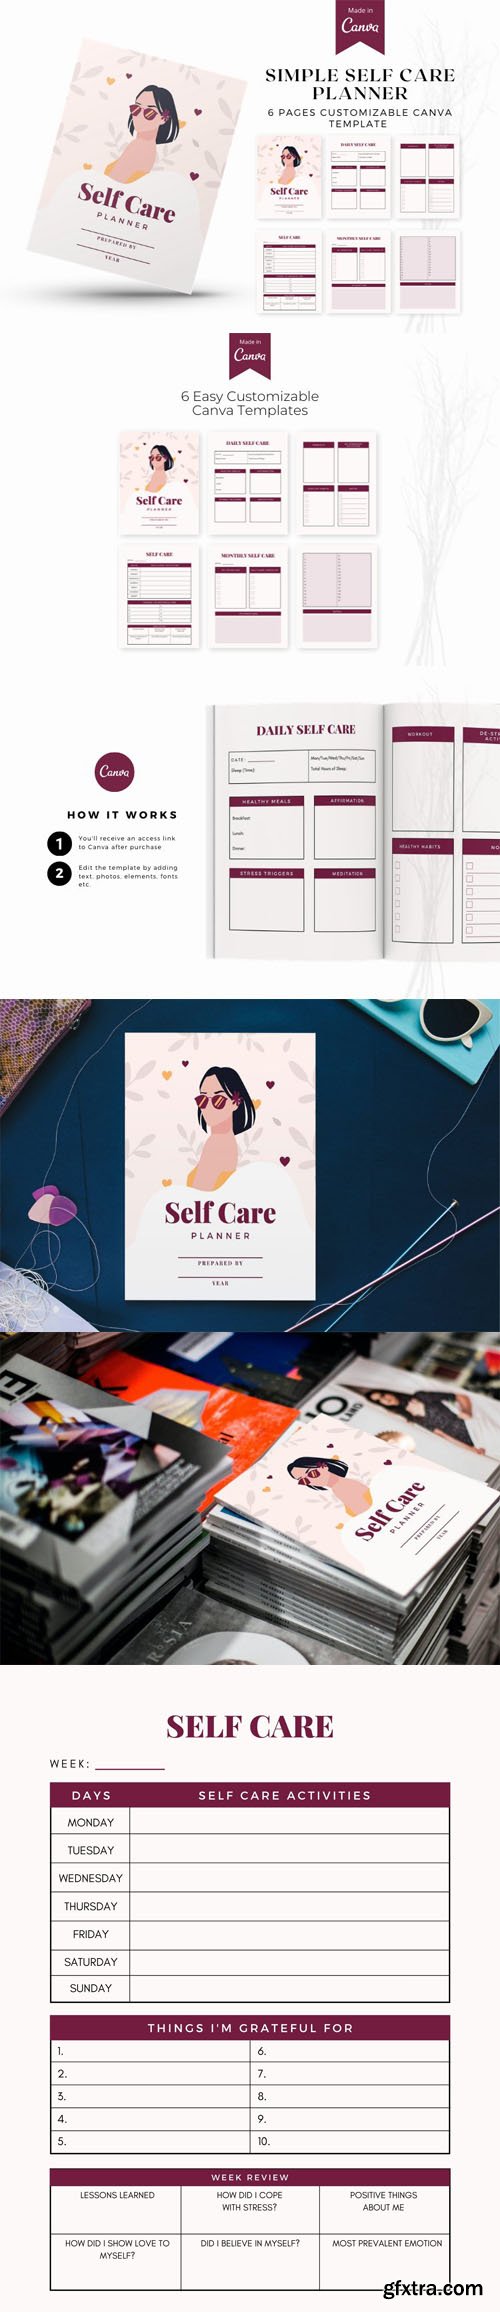 self-care-planner-printable-templates-gfxtra